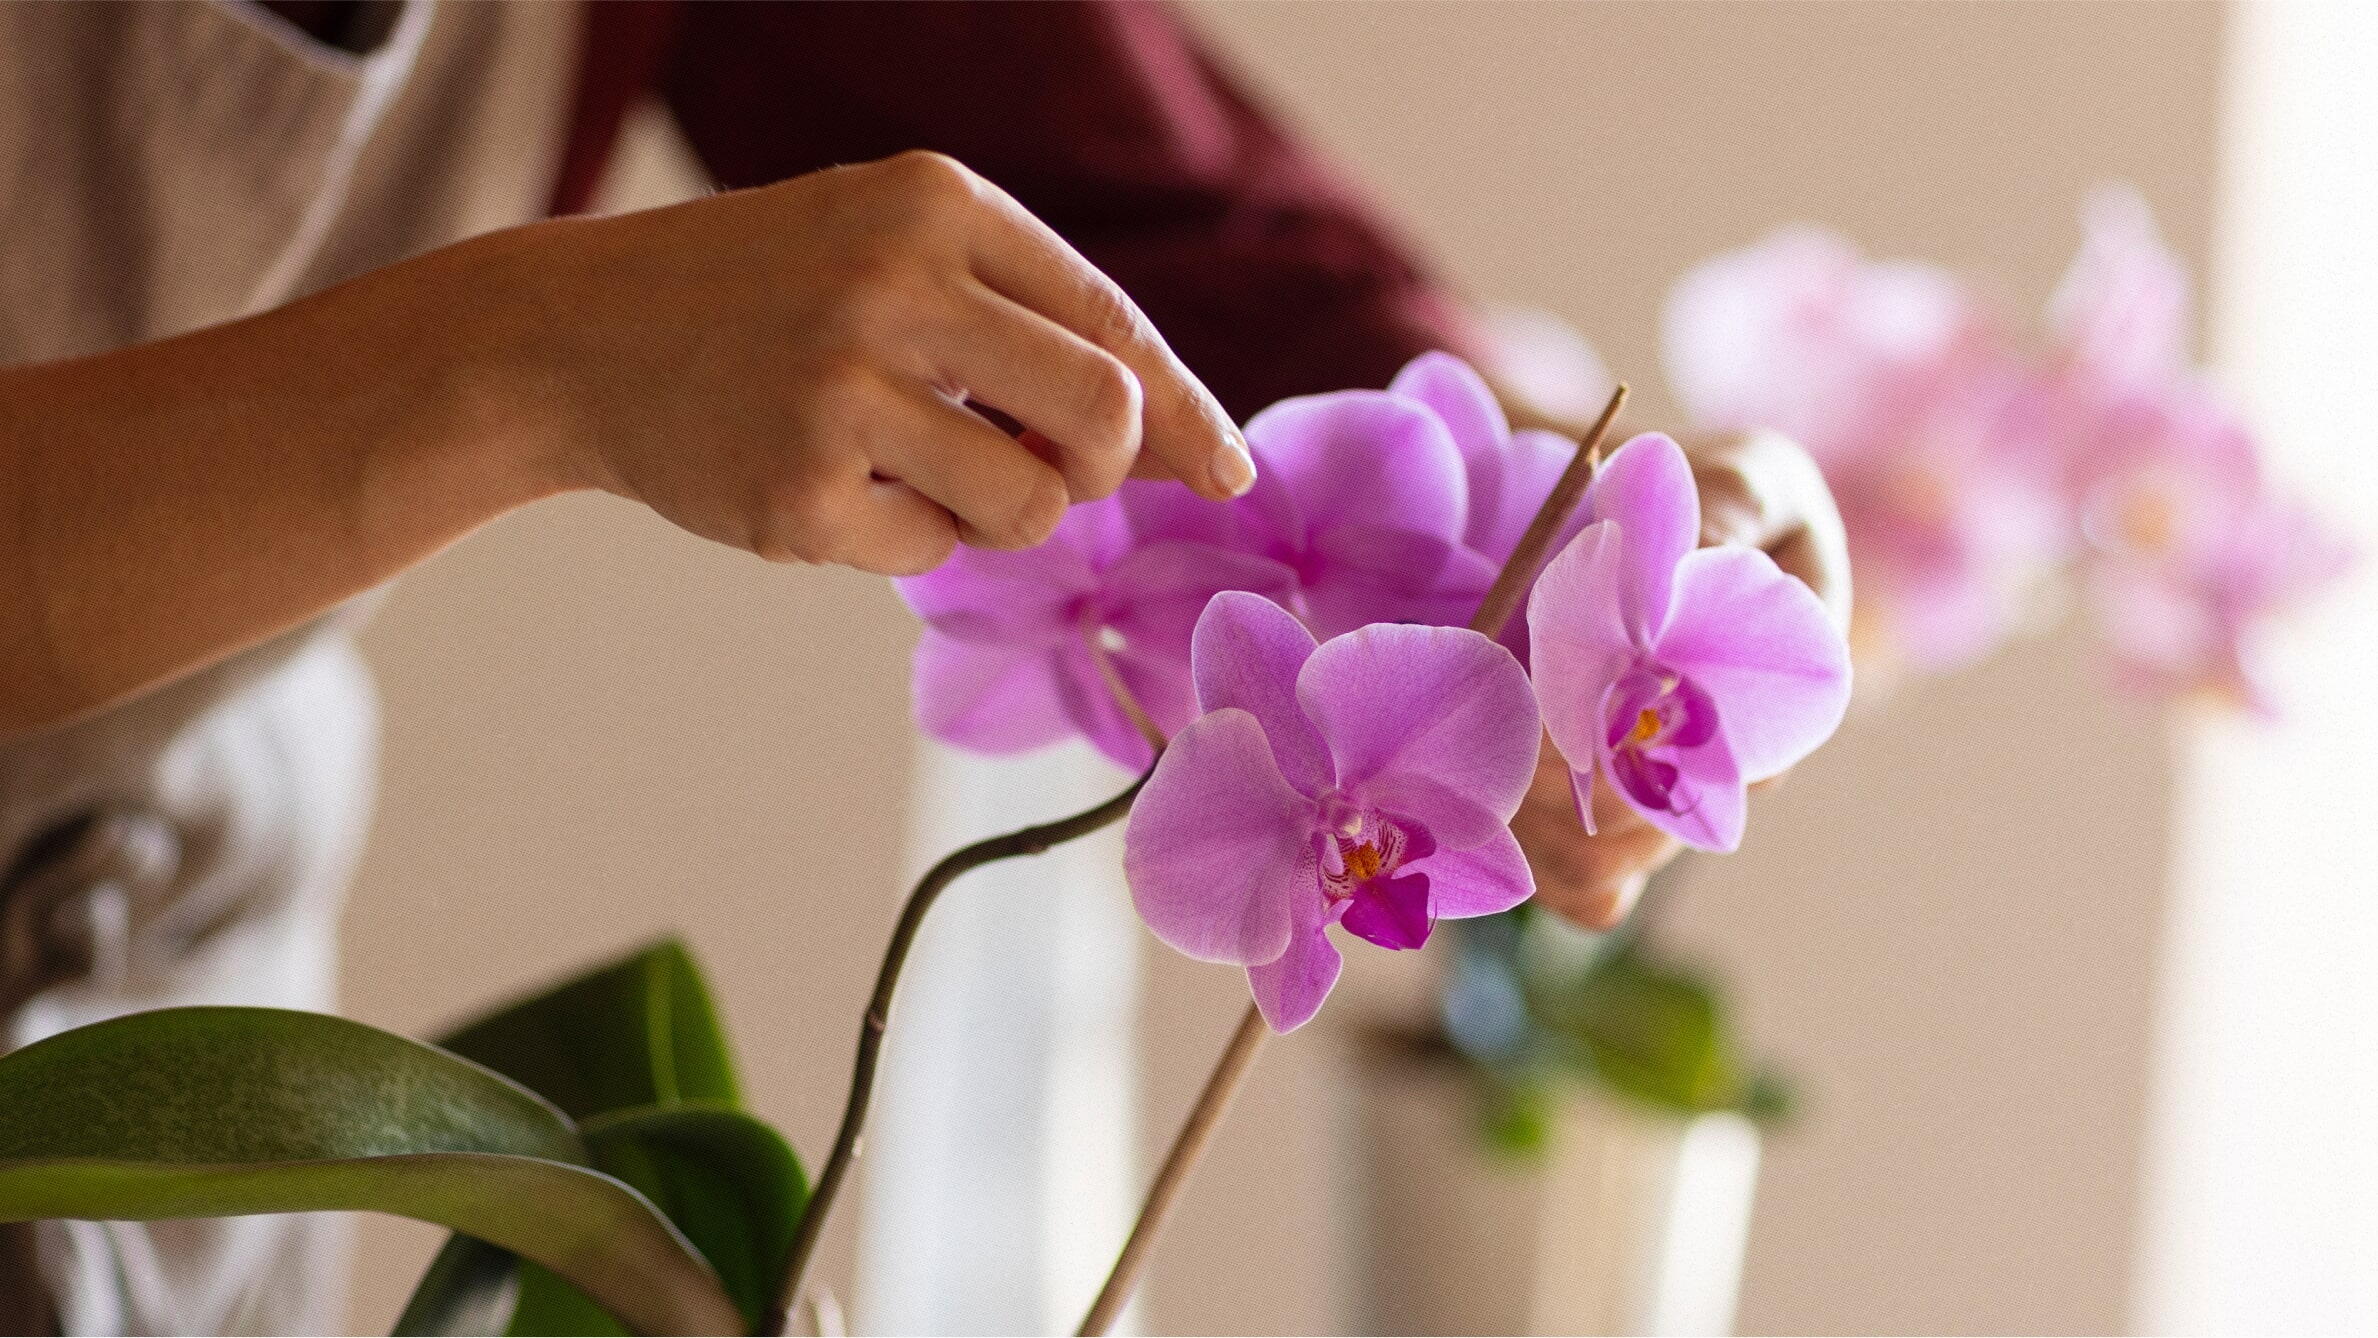 Orchid meaning in chinese culture